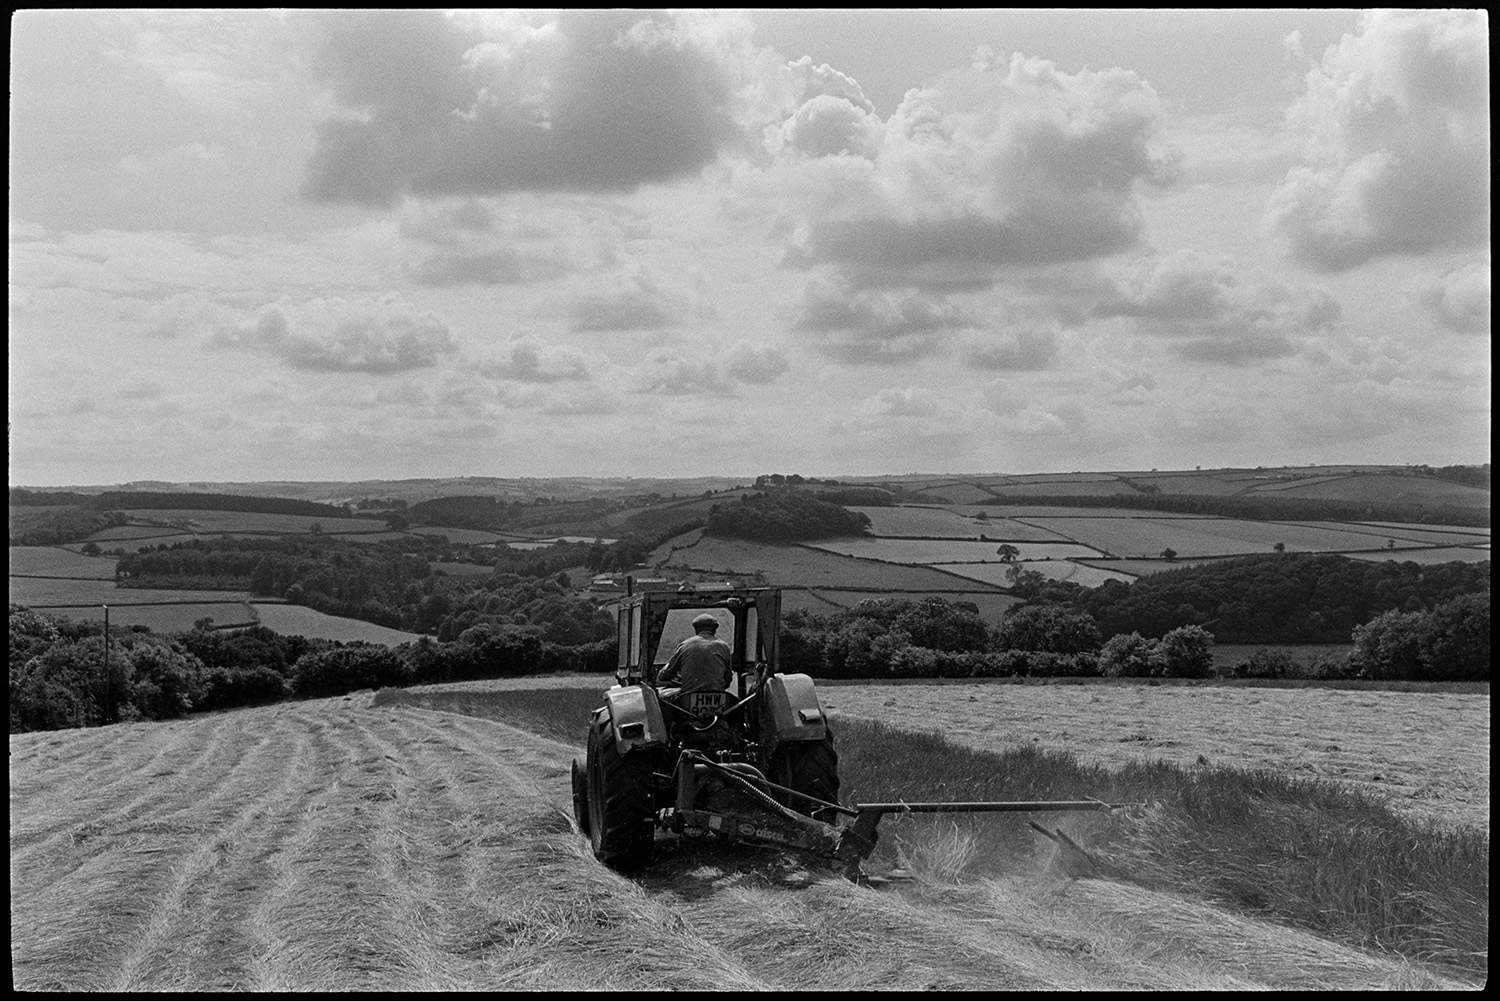 Tractor and grass cutter, mower in sunny landscape. 
[George Ayre using a tractor a mower to cut grass for hay, in a sunny field at Ashwell, Dolton. The tractor is moving away from the camera. Clouds are visible in the sky and a landscape of fields, hedgerows and trees can be seen in the background.]